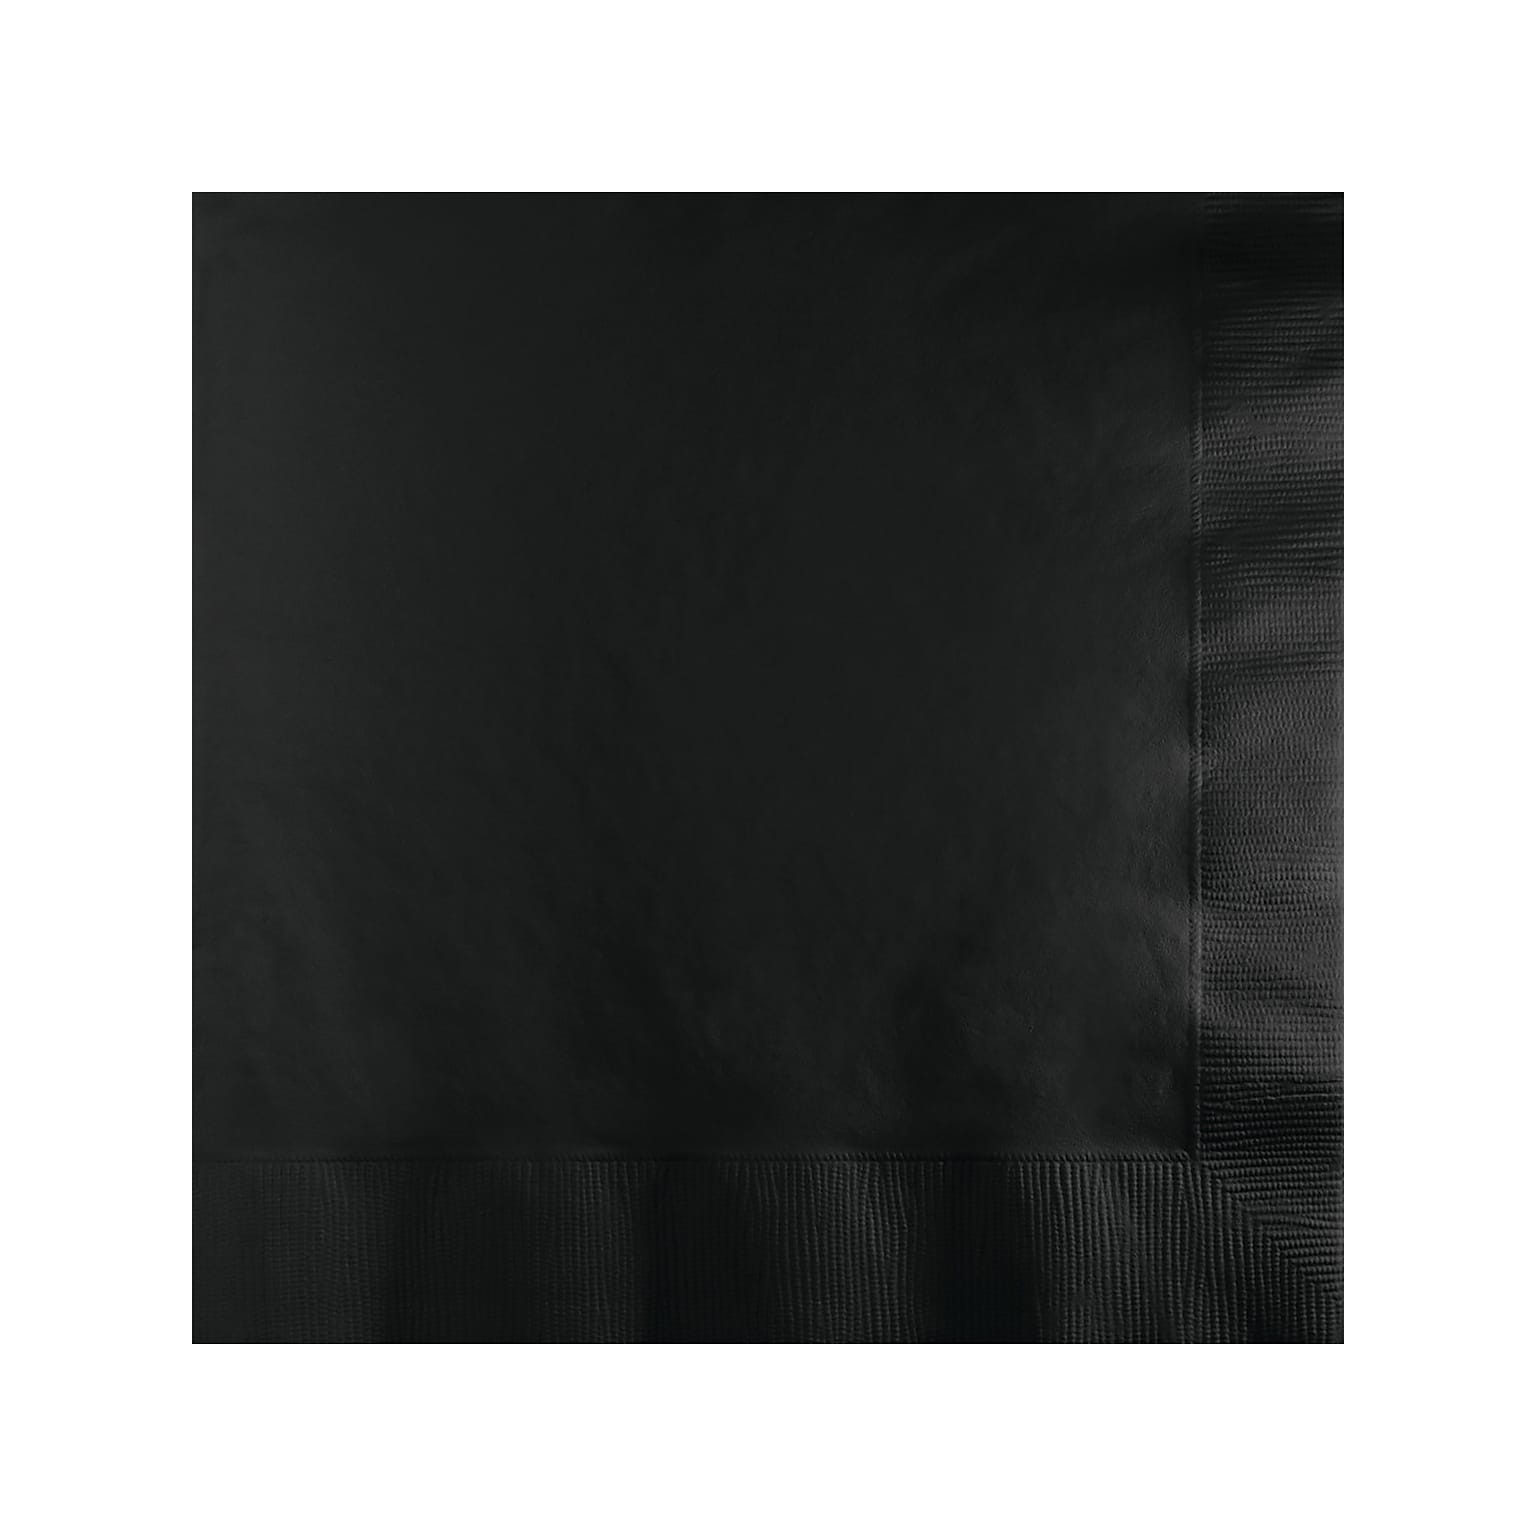 Creative Converting Touch of Color Lunch Napkin, 2-ply, Black Velvet, 150 Napkins/Pack (DTC139194135NAP)